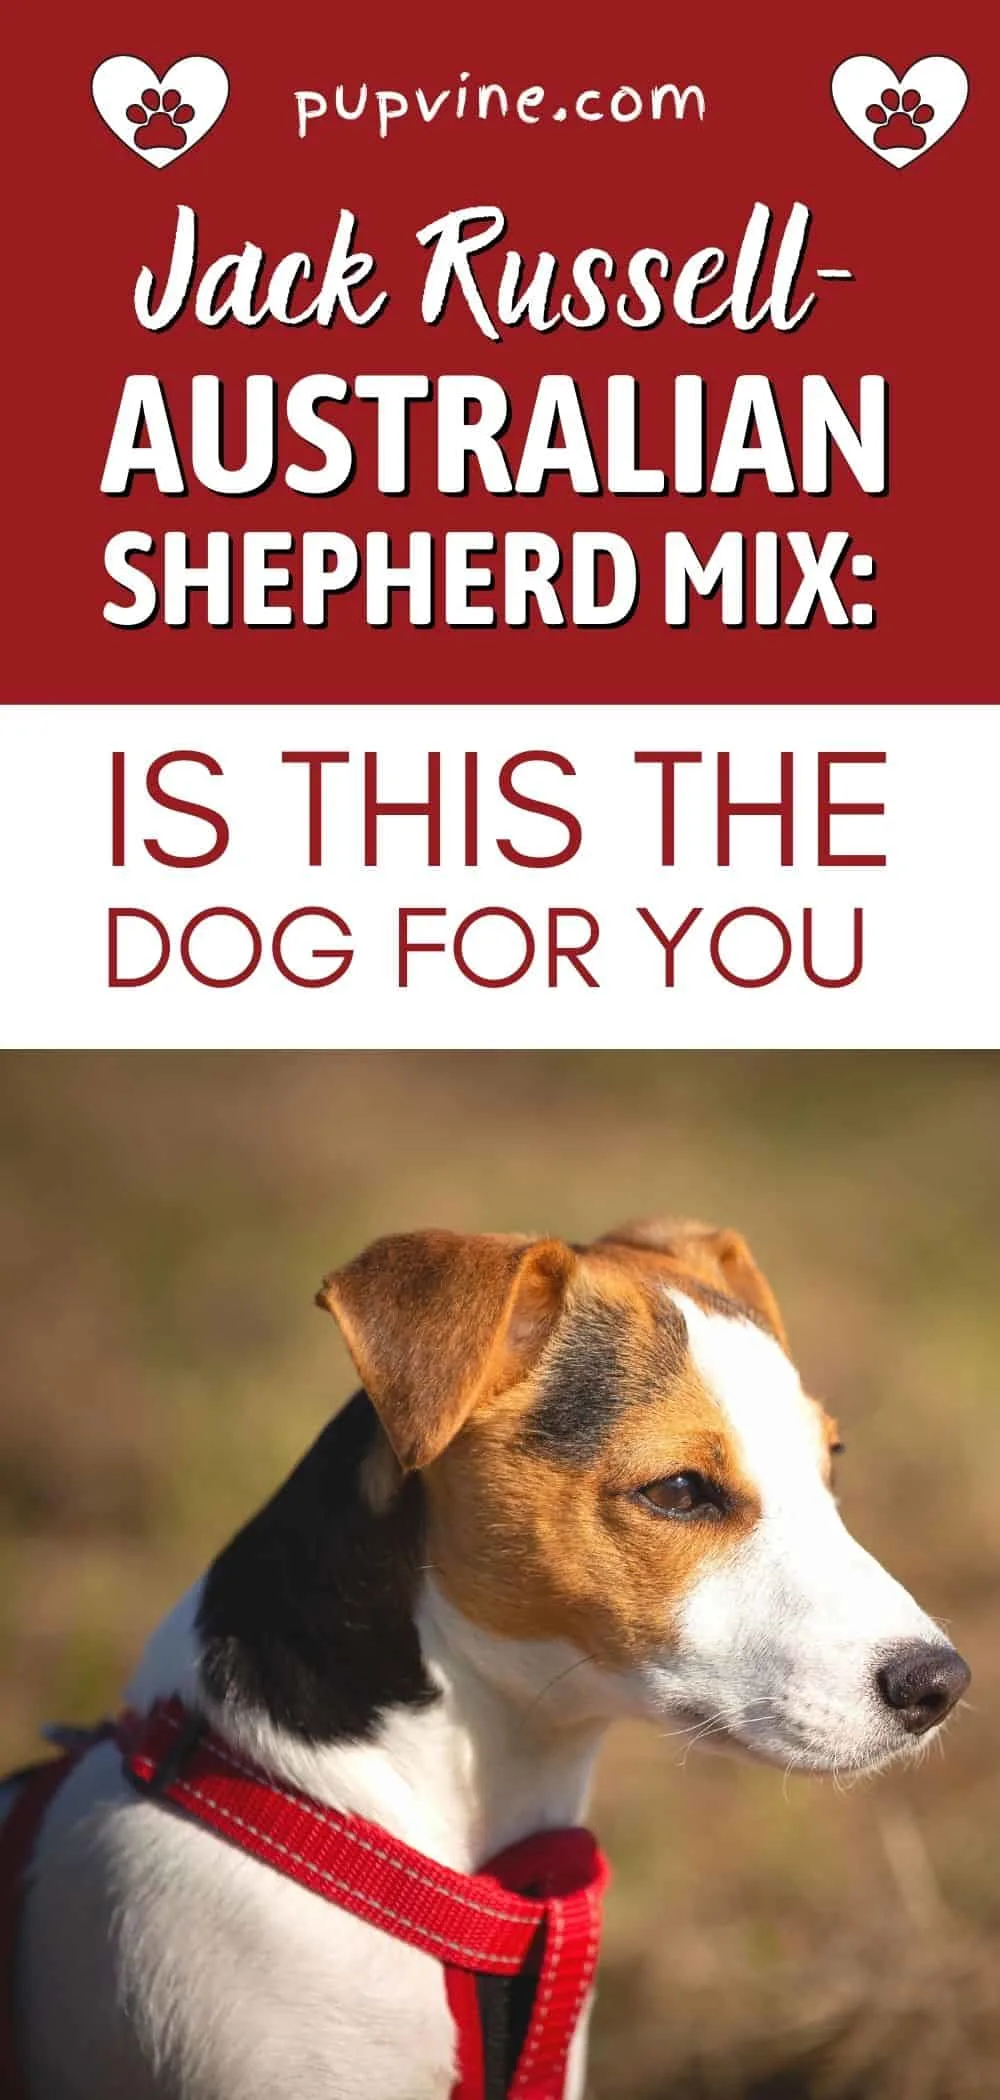 Jack Russell - Australian Shepherd Mix: Is This The Dog For You